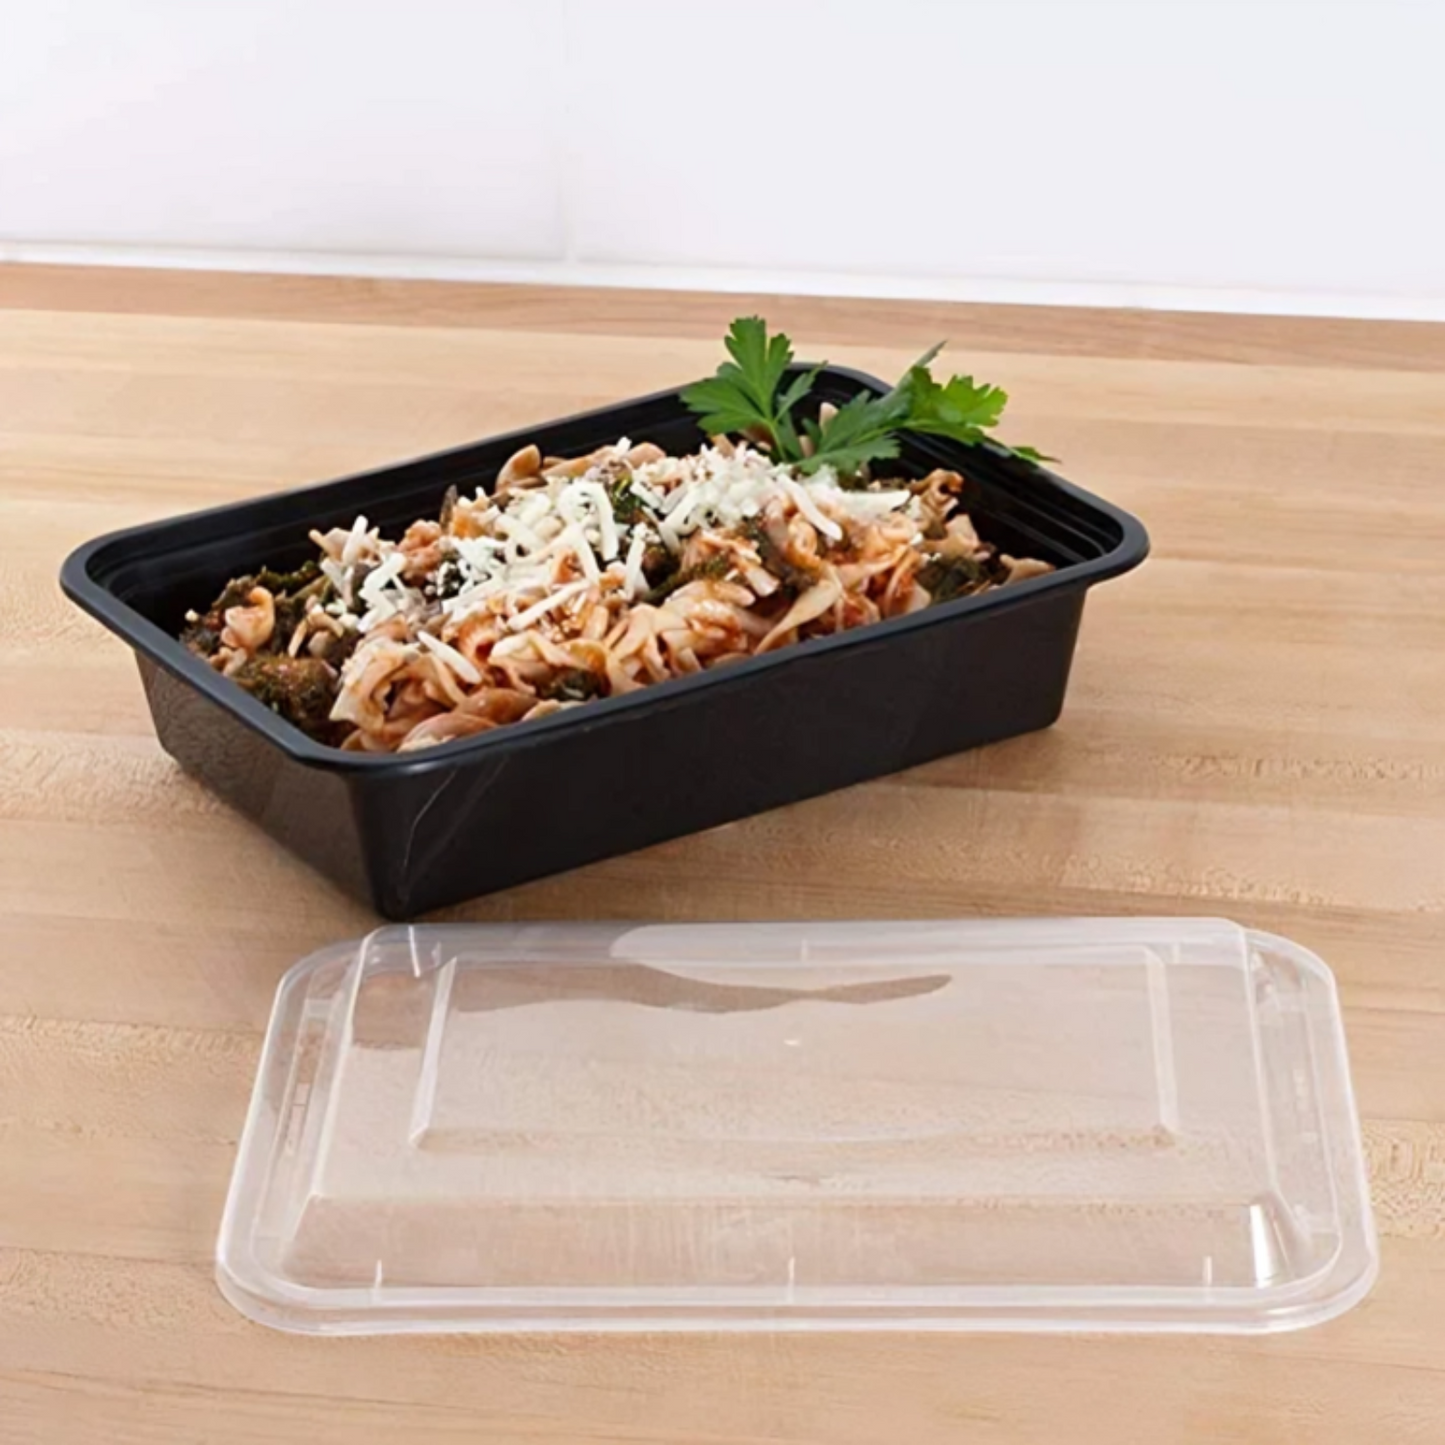 16oz. Disposable Black Rectangular Meal Prep/ Bento Box Containers with Lids Food Storage & Serving VeZee   